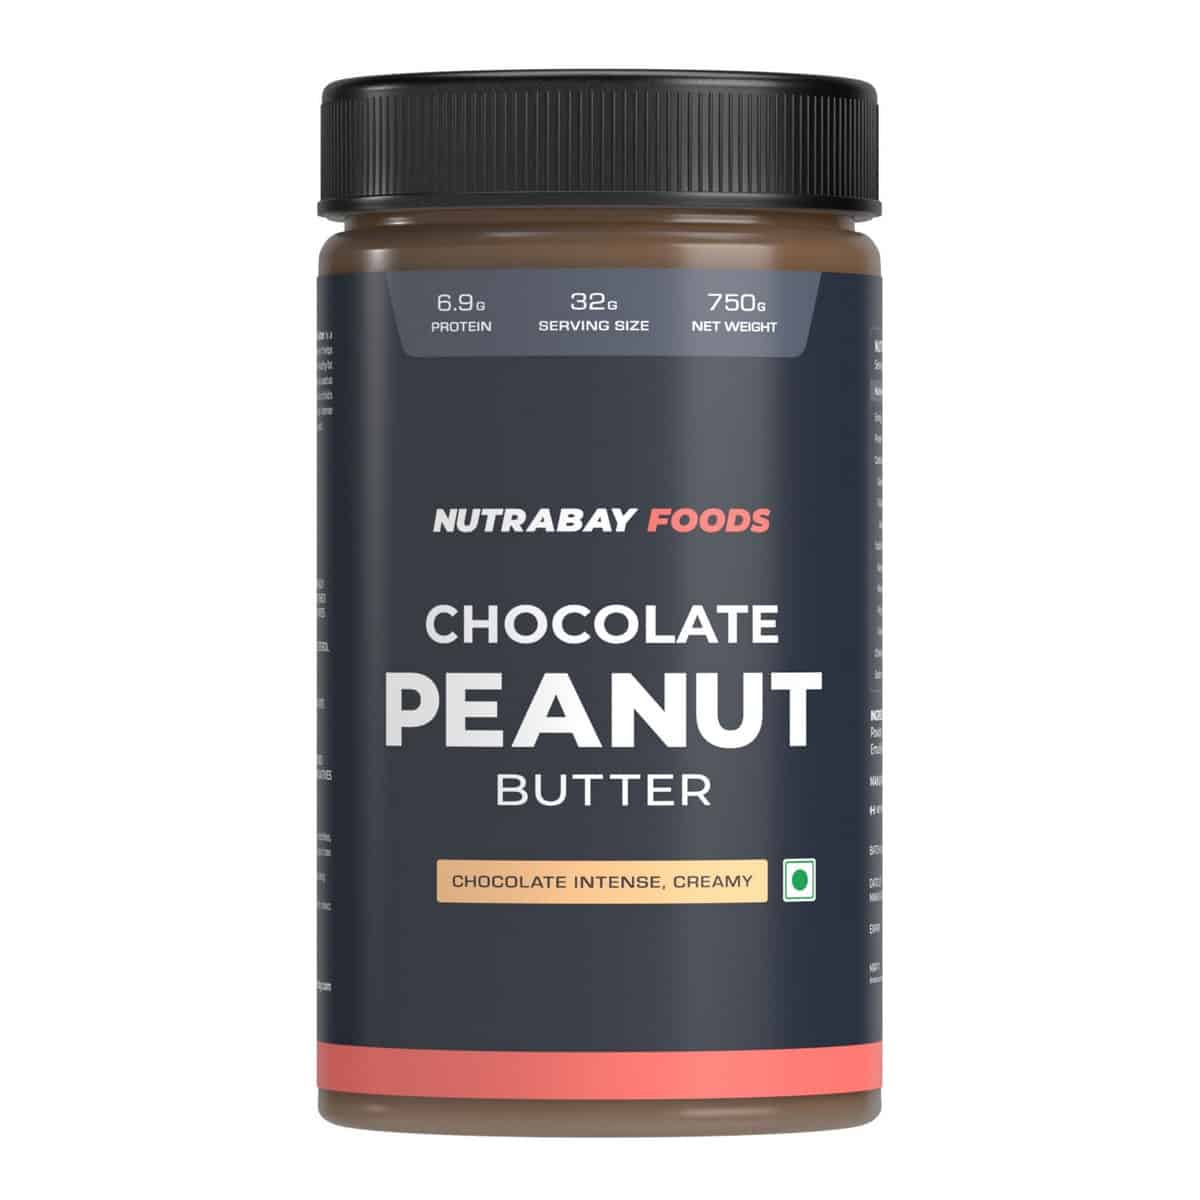 Nutrabay Foods Peanut Butter Chocolate